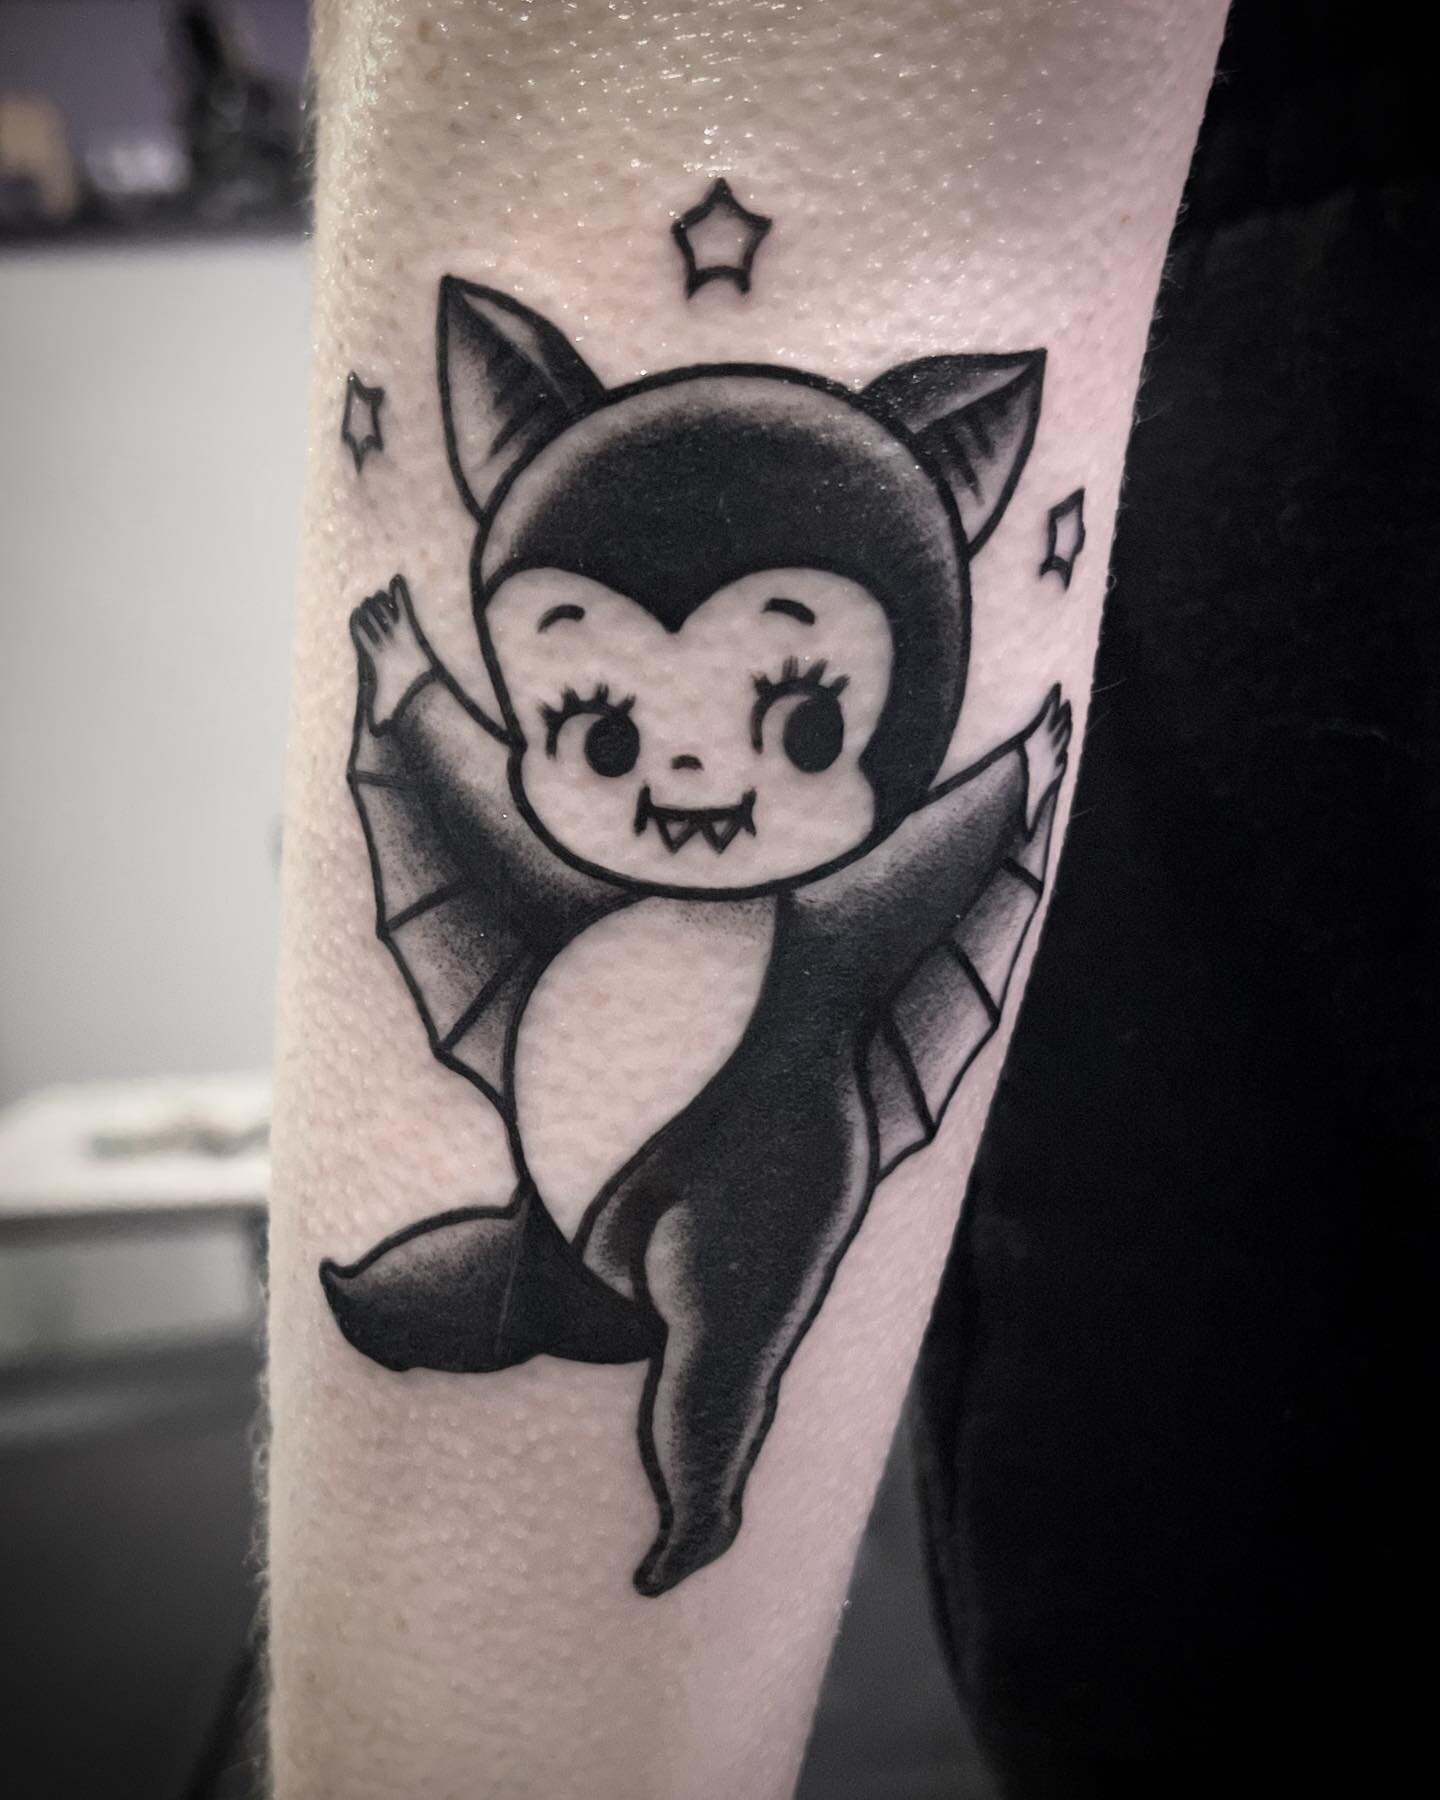 got to do this cute lil kewpie jawn on our apprentice a few months ago 😊👼🏻🦇✨